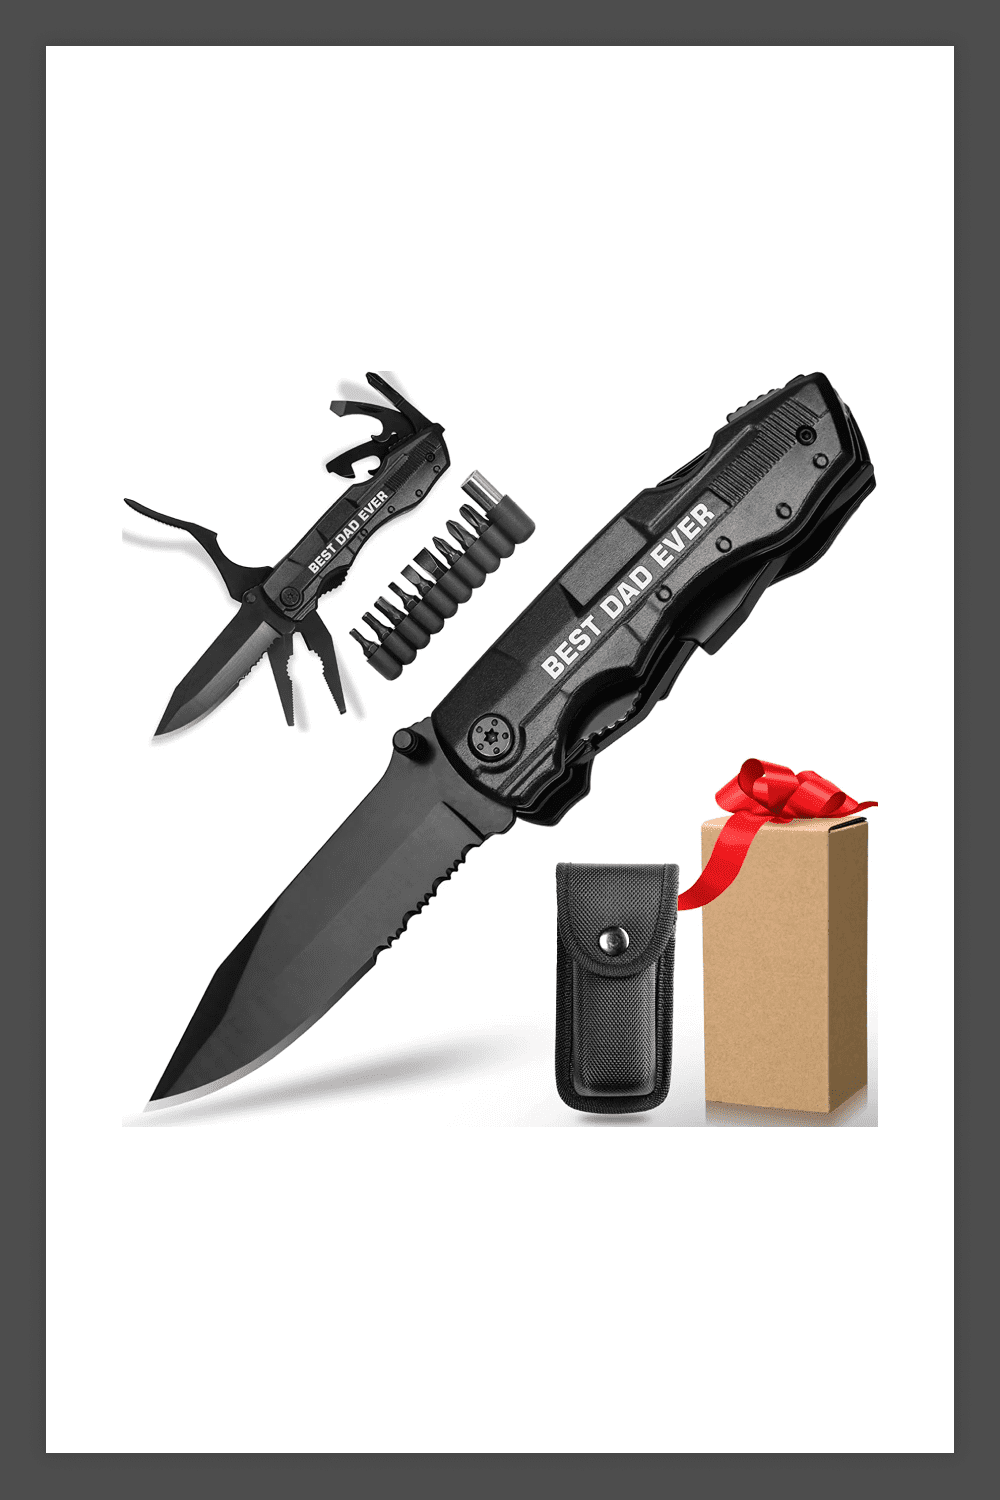 Black Multitool Knife with gift box.